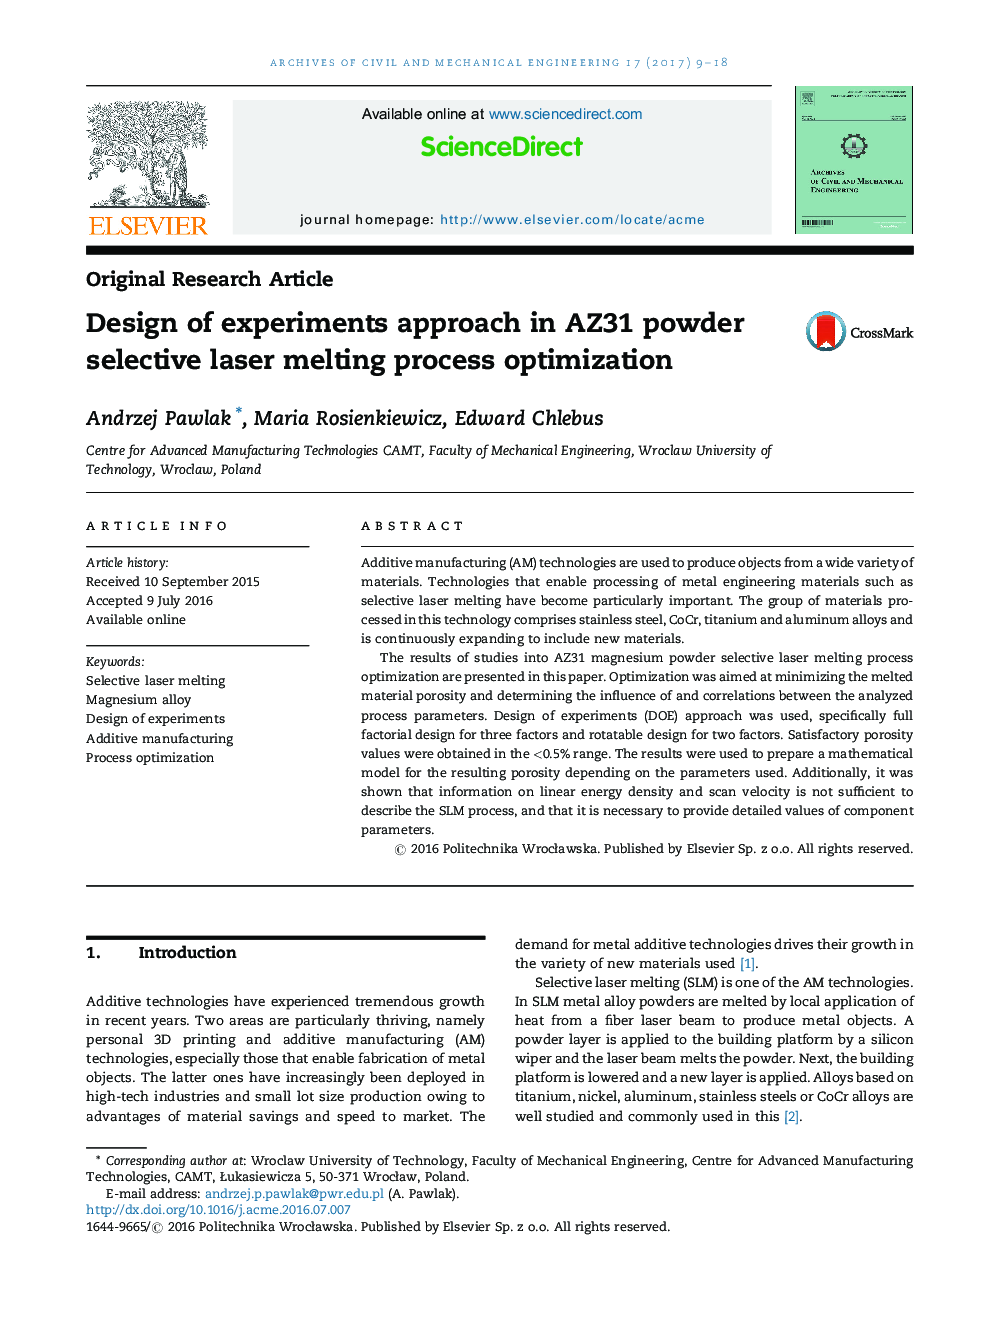 Design of experiments approach in AZ31 powder selective laser melting process optimization